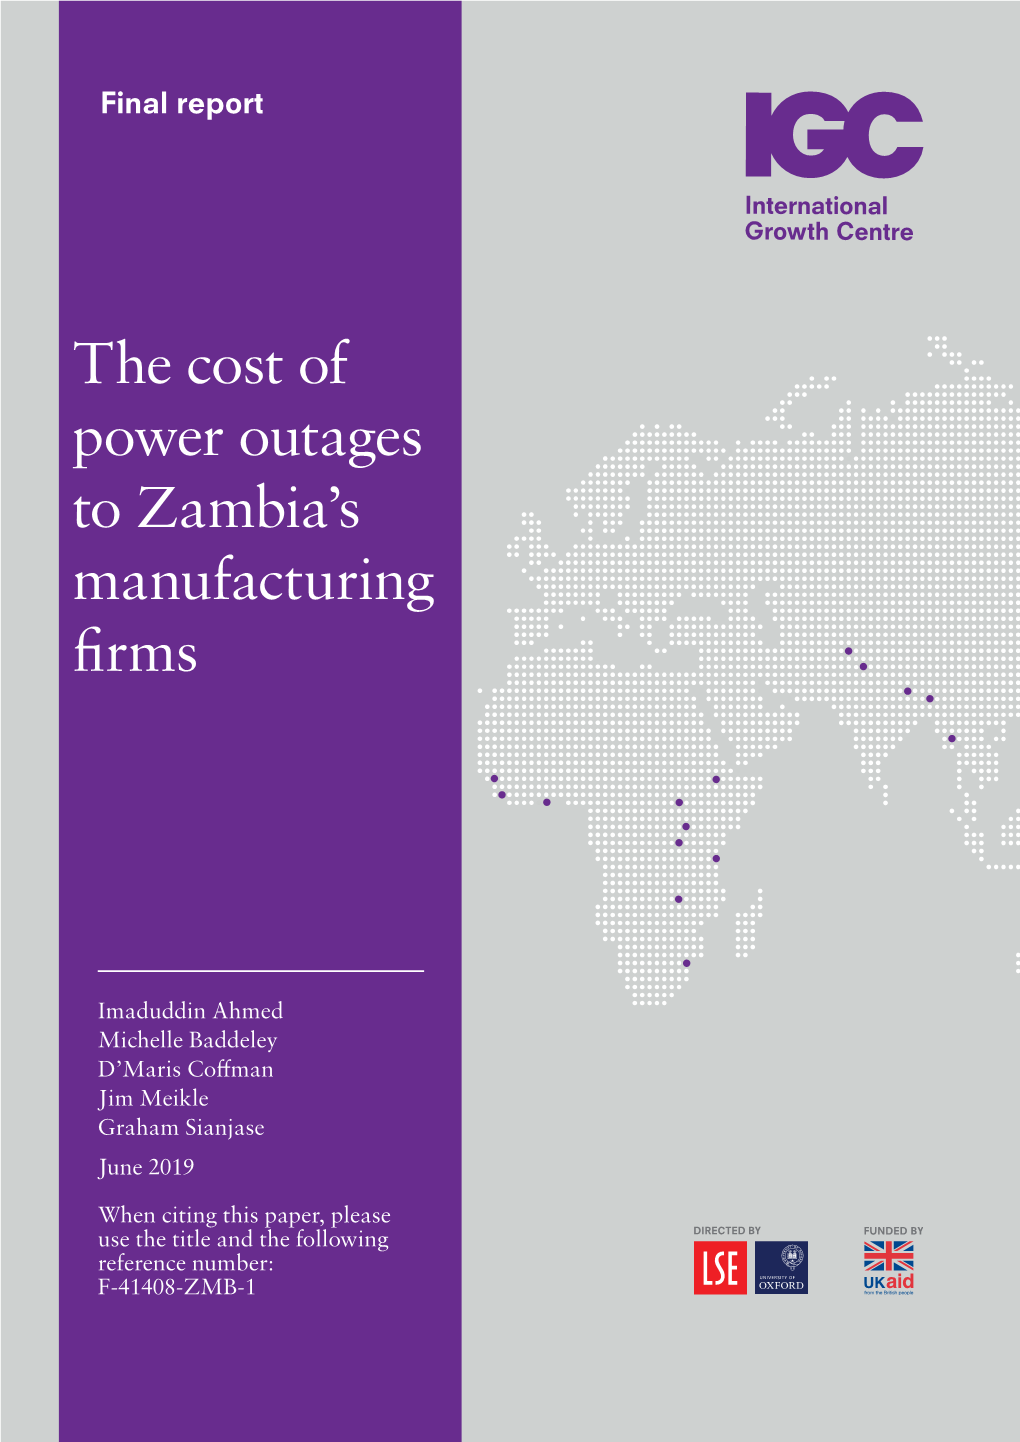 The Cost of Power Outages to Zambia's Manufacturing Firms